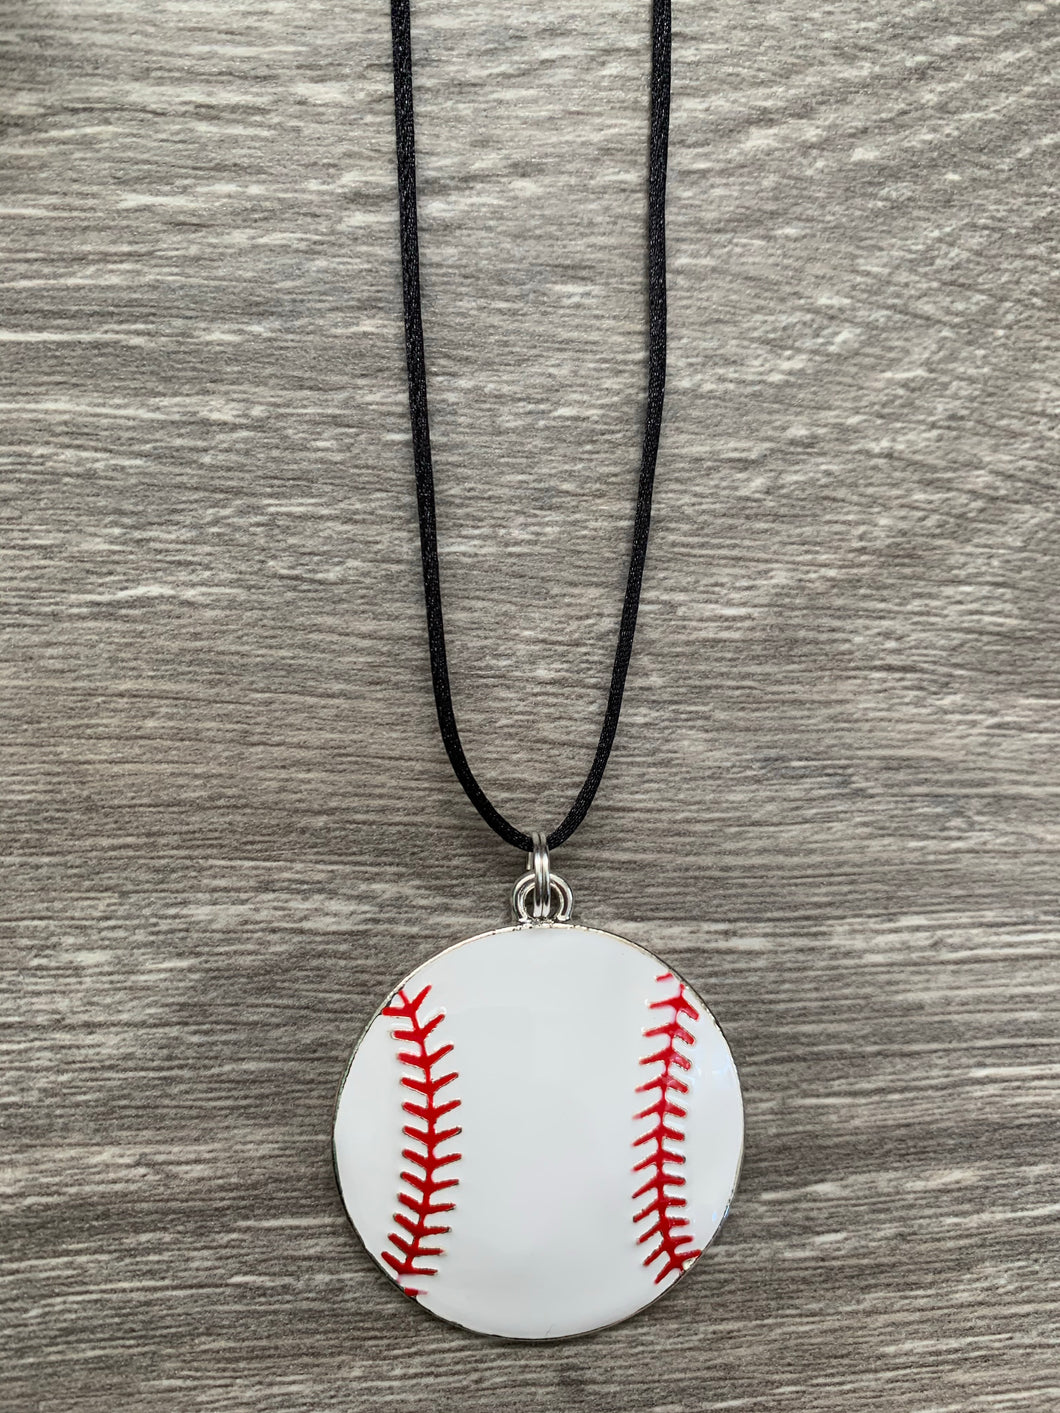 When I Grow Up- baseball pendant only